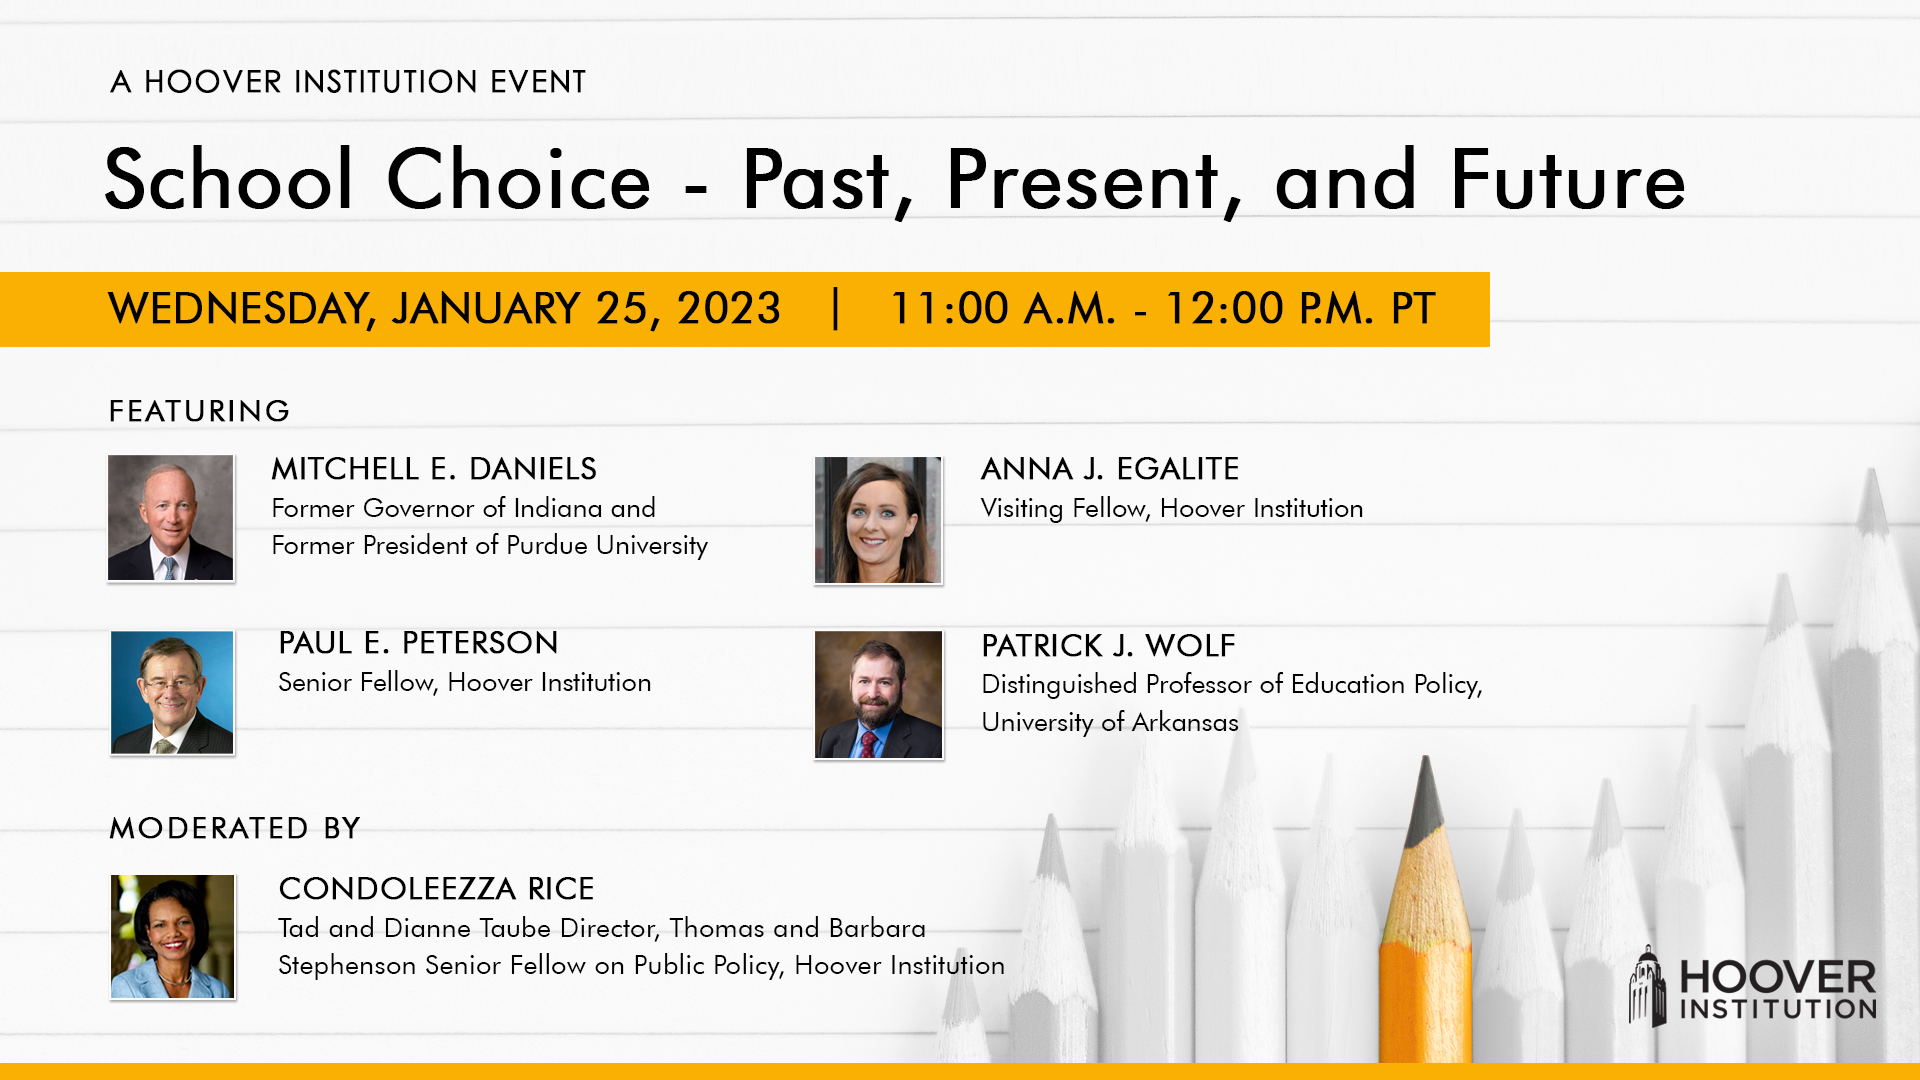 School Choice - Past, Present, and Future